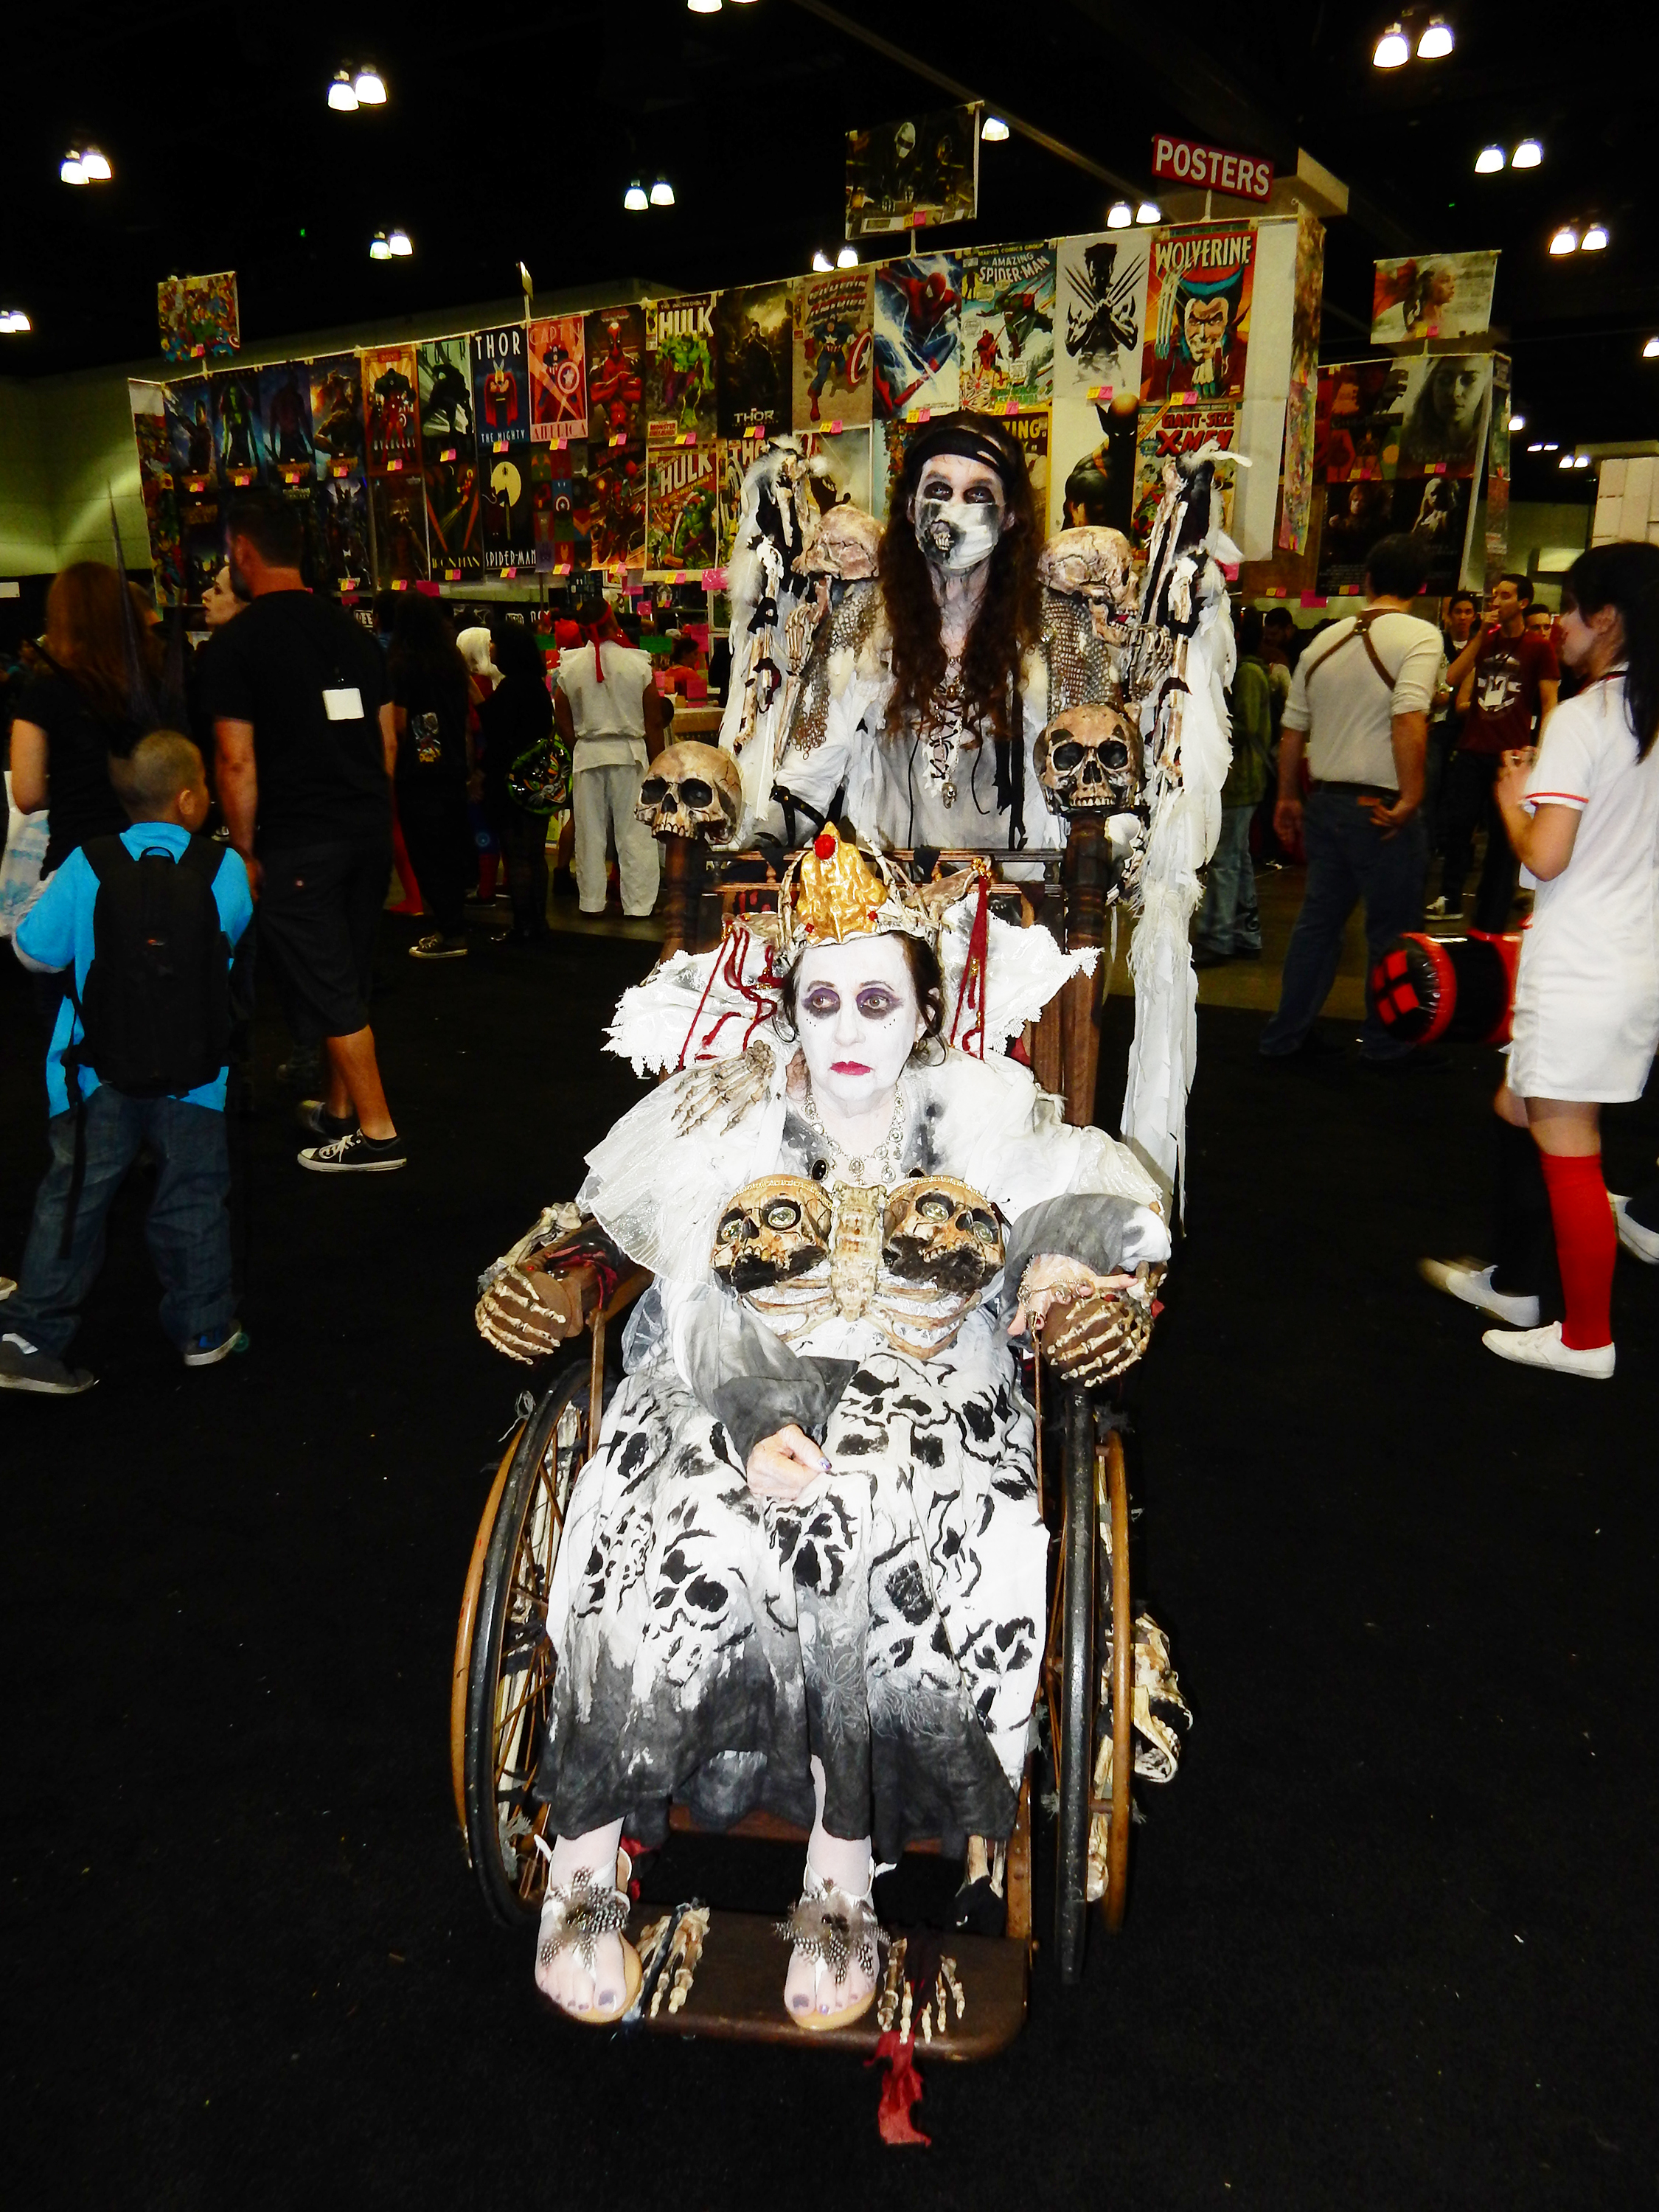 Comikaze Photos by Anne Hall of Syrenia Imagery